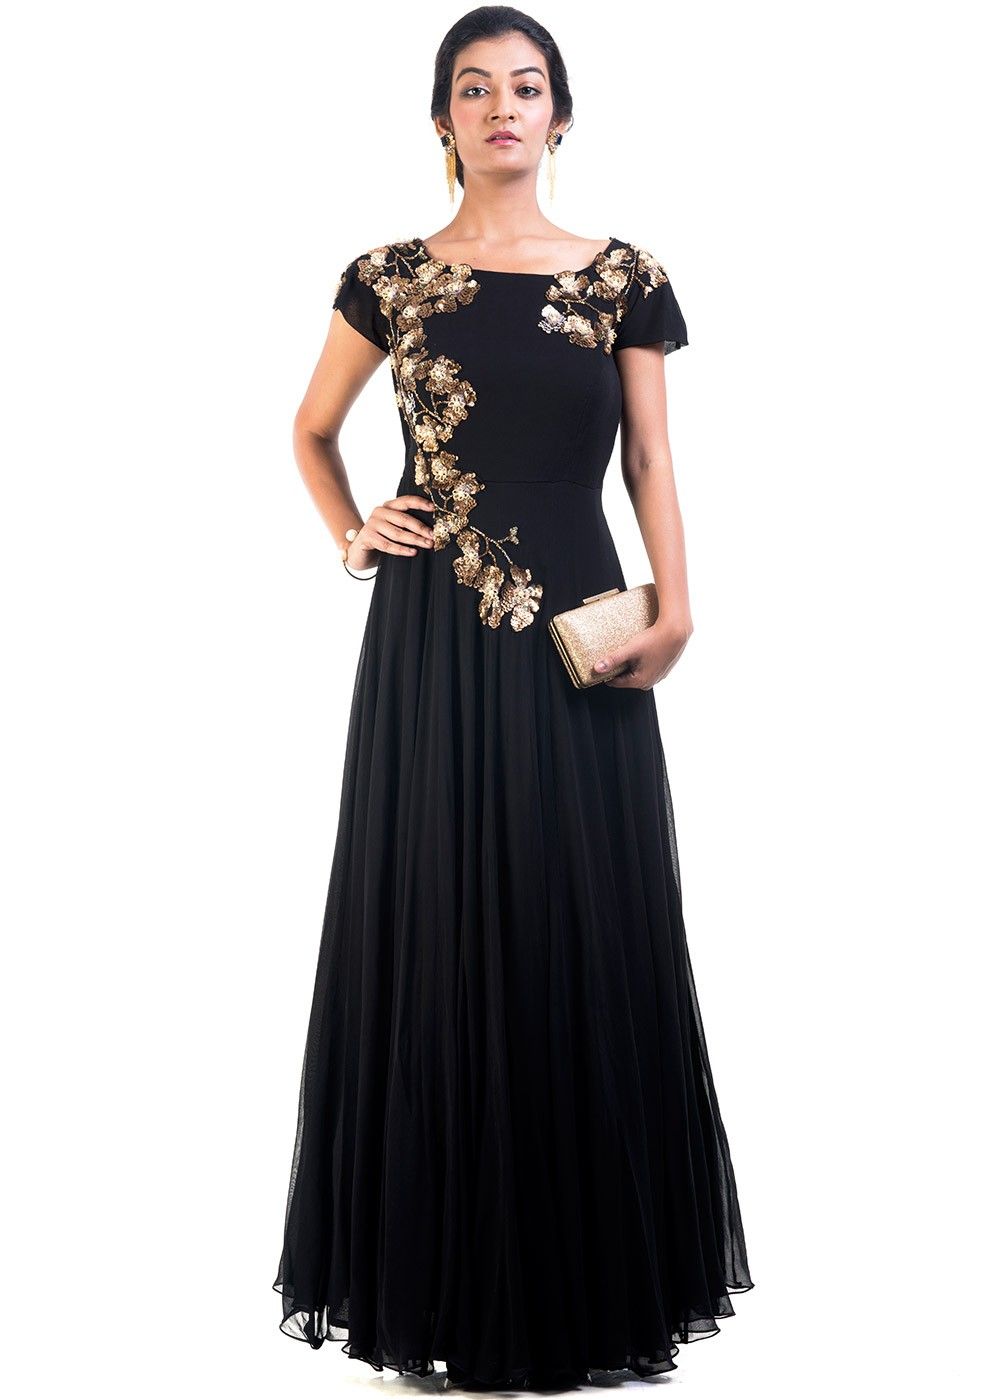 black gown with golden work